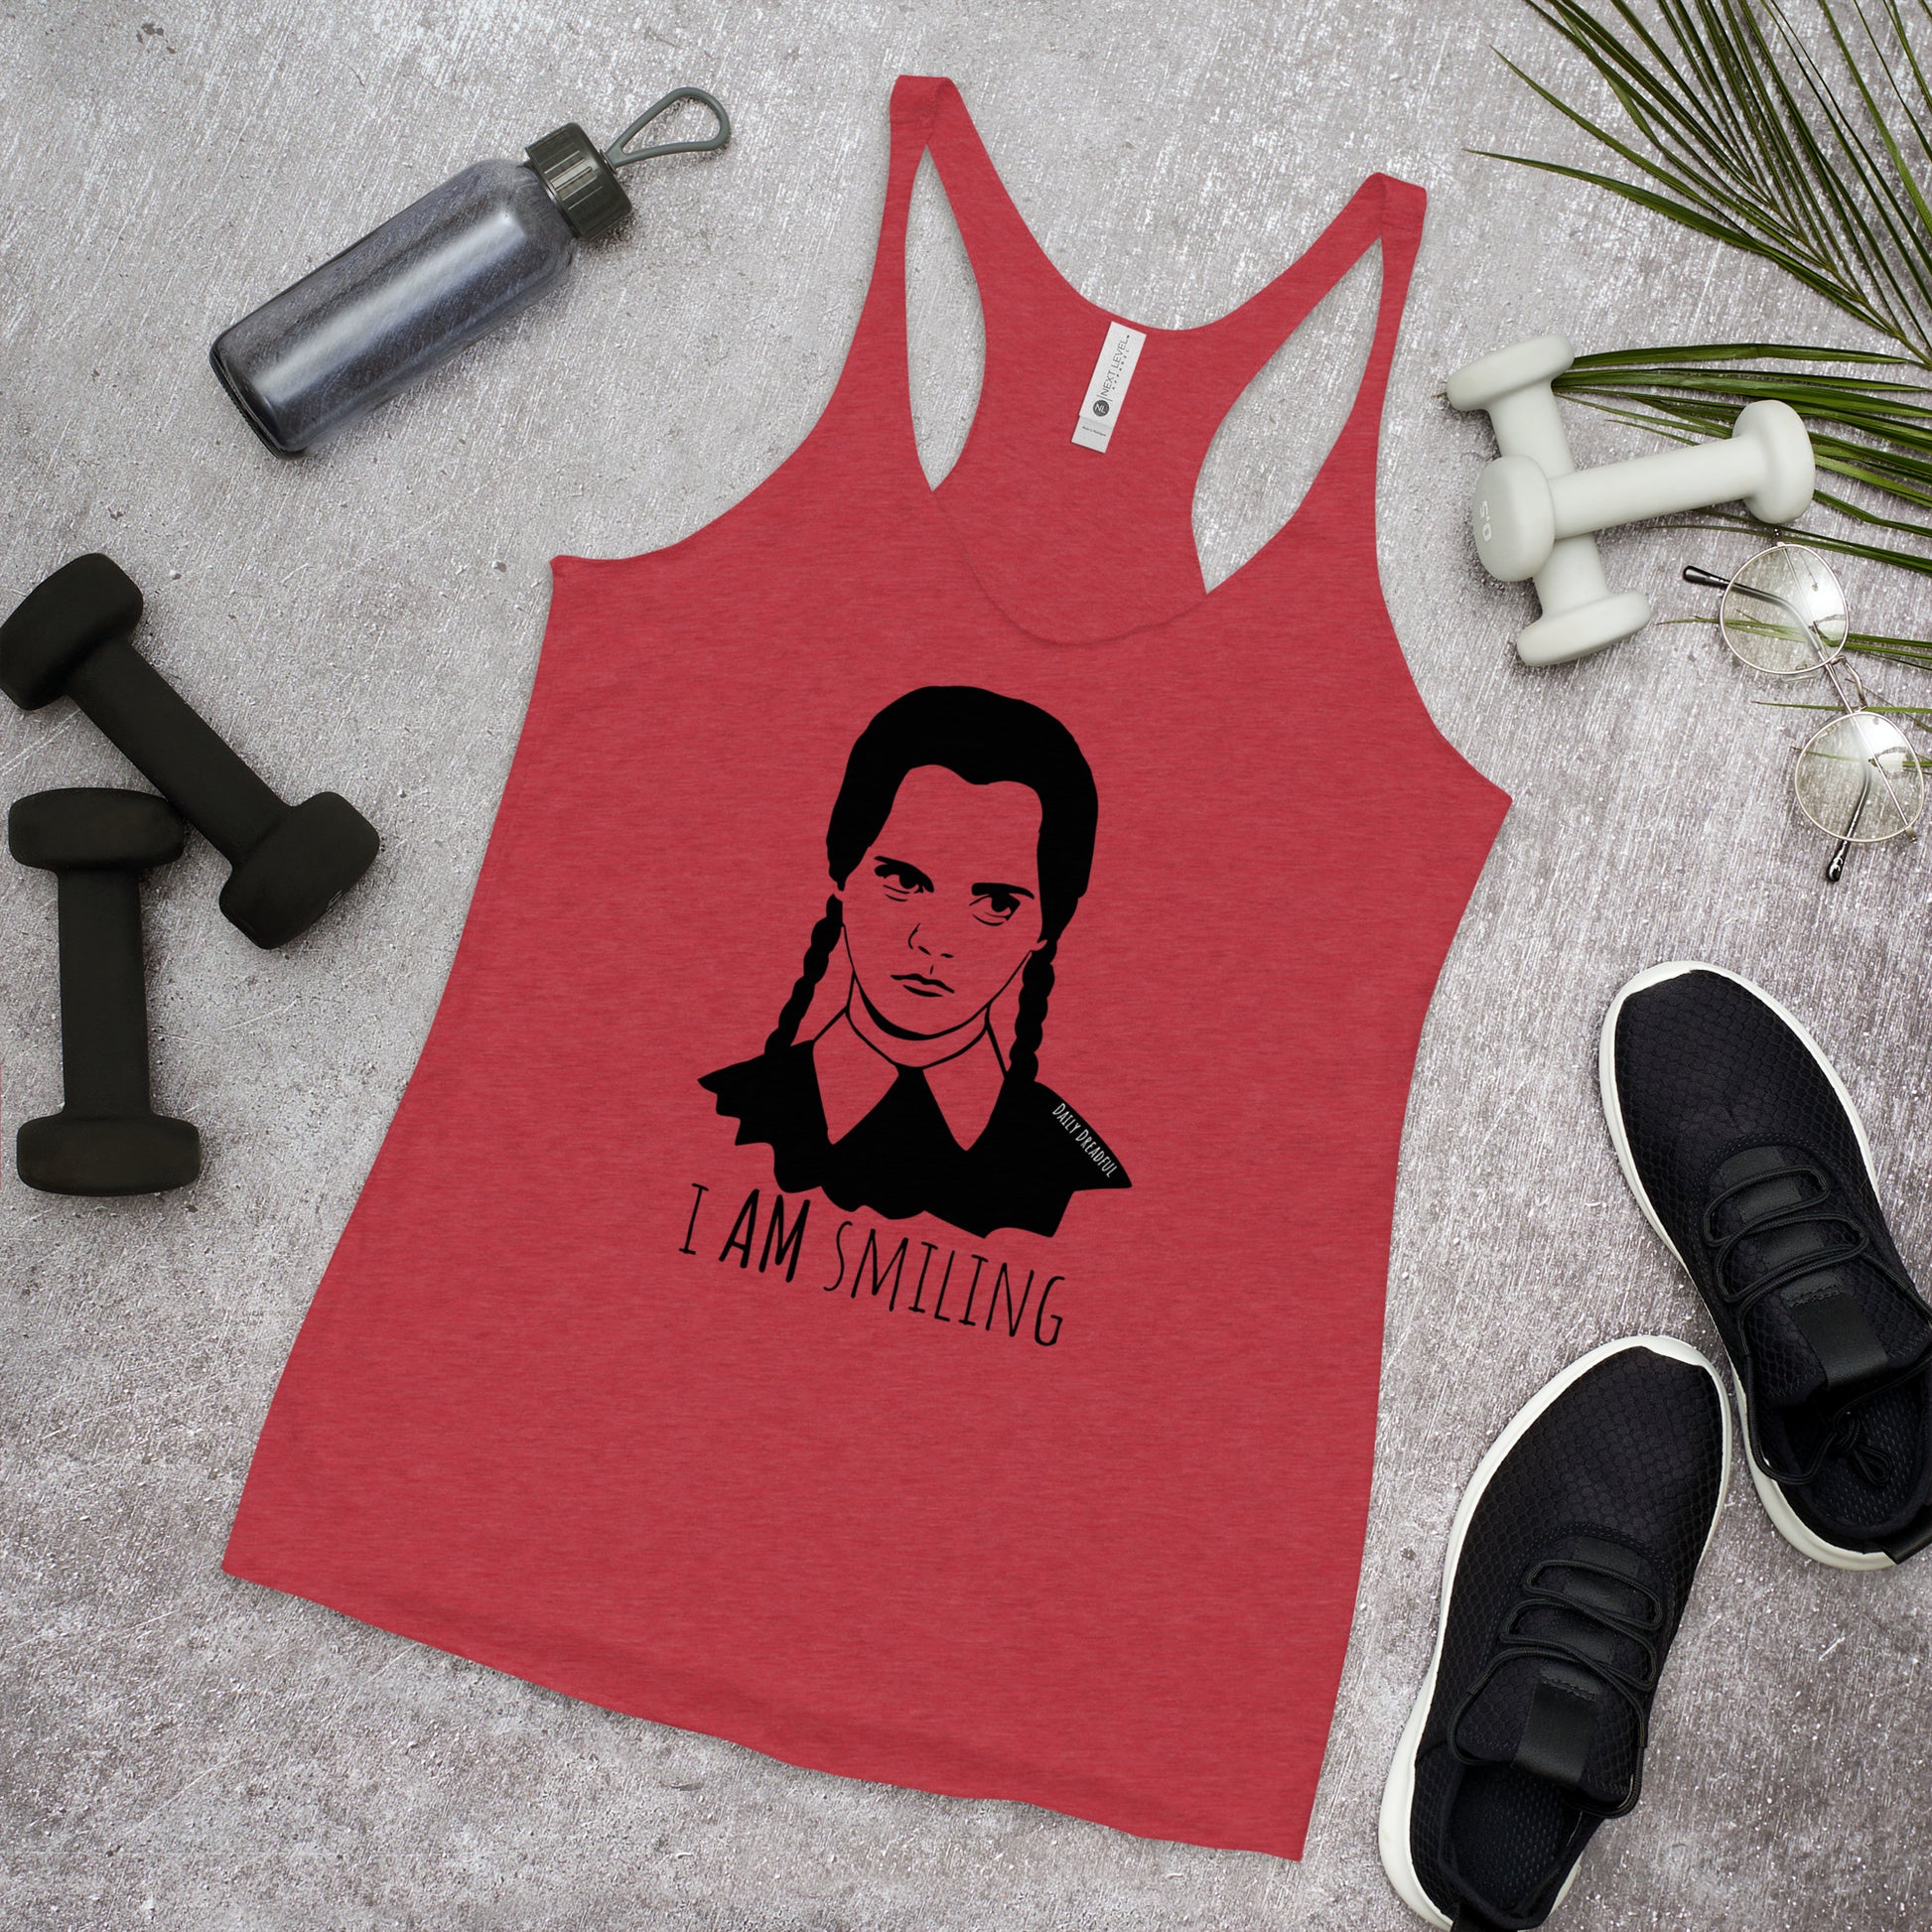 Vintage Red "I Am Smiling" Wednesday Addams Racerback Tank Top from Daily Dreadful